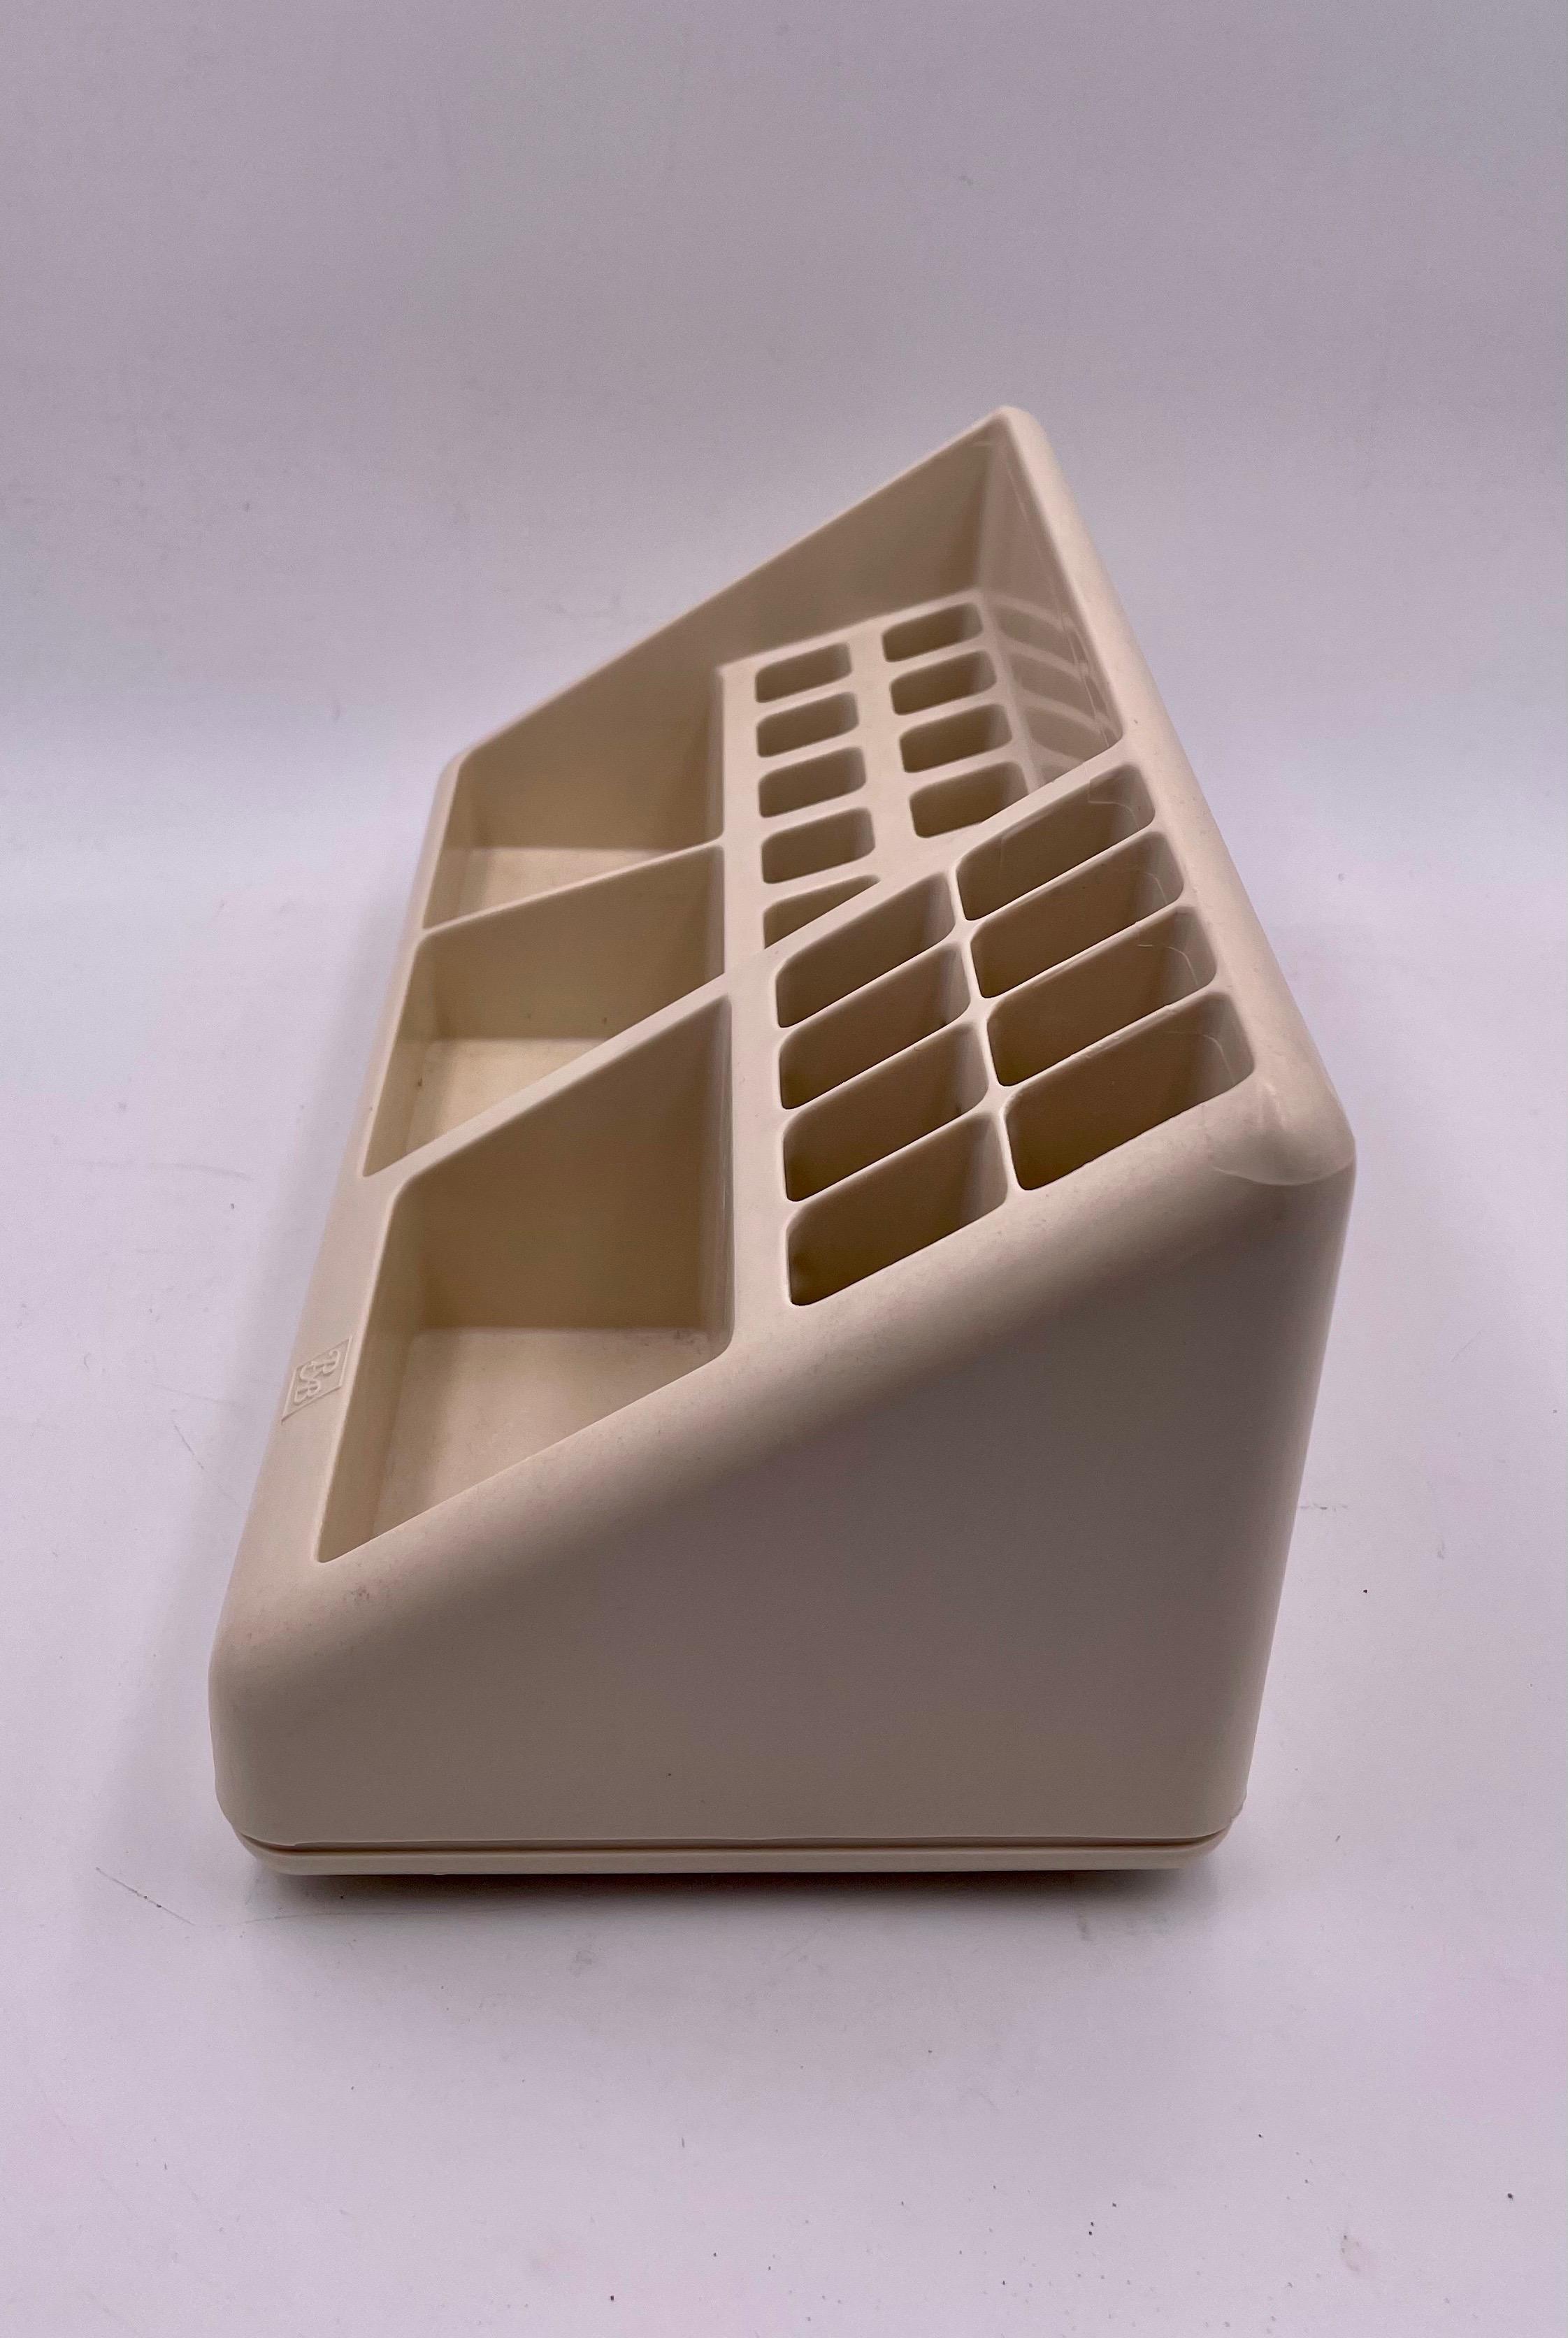 Great design on this space-age in plastic with a cream color desk caddy organizer, circa 1980's versatile and functional.